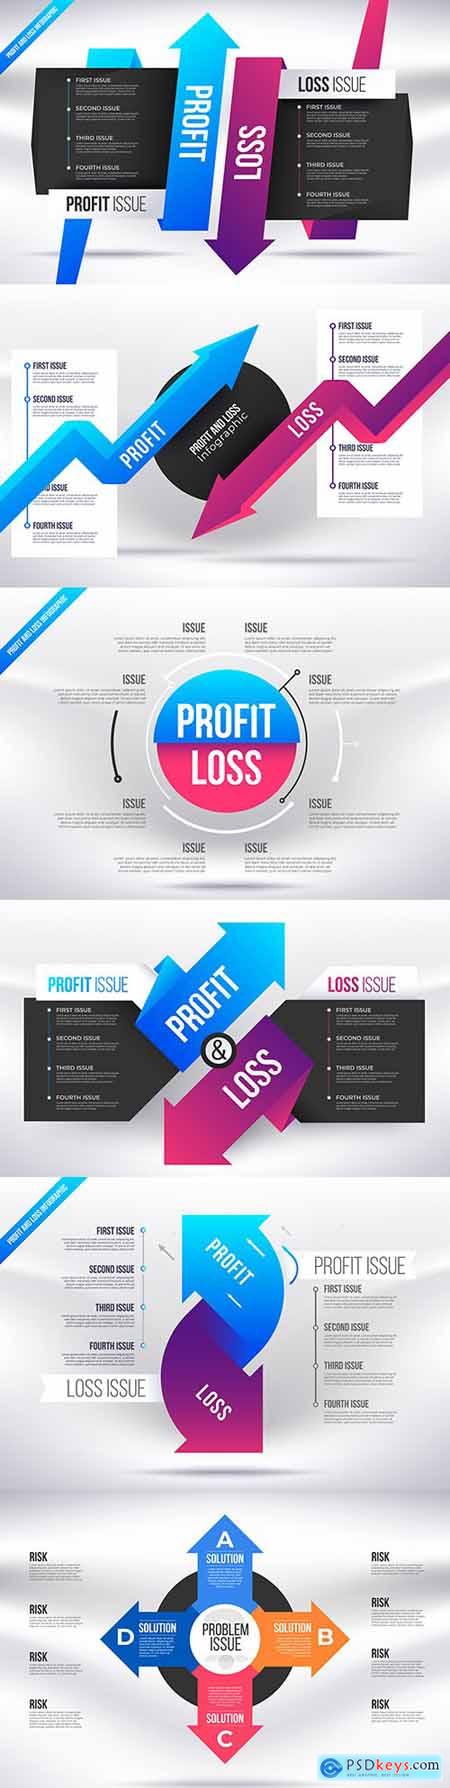 Profit and loss infographic simple business presentation